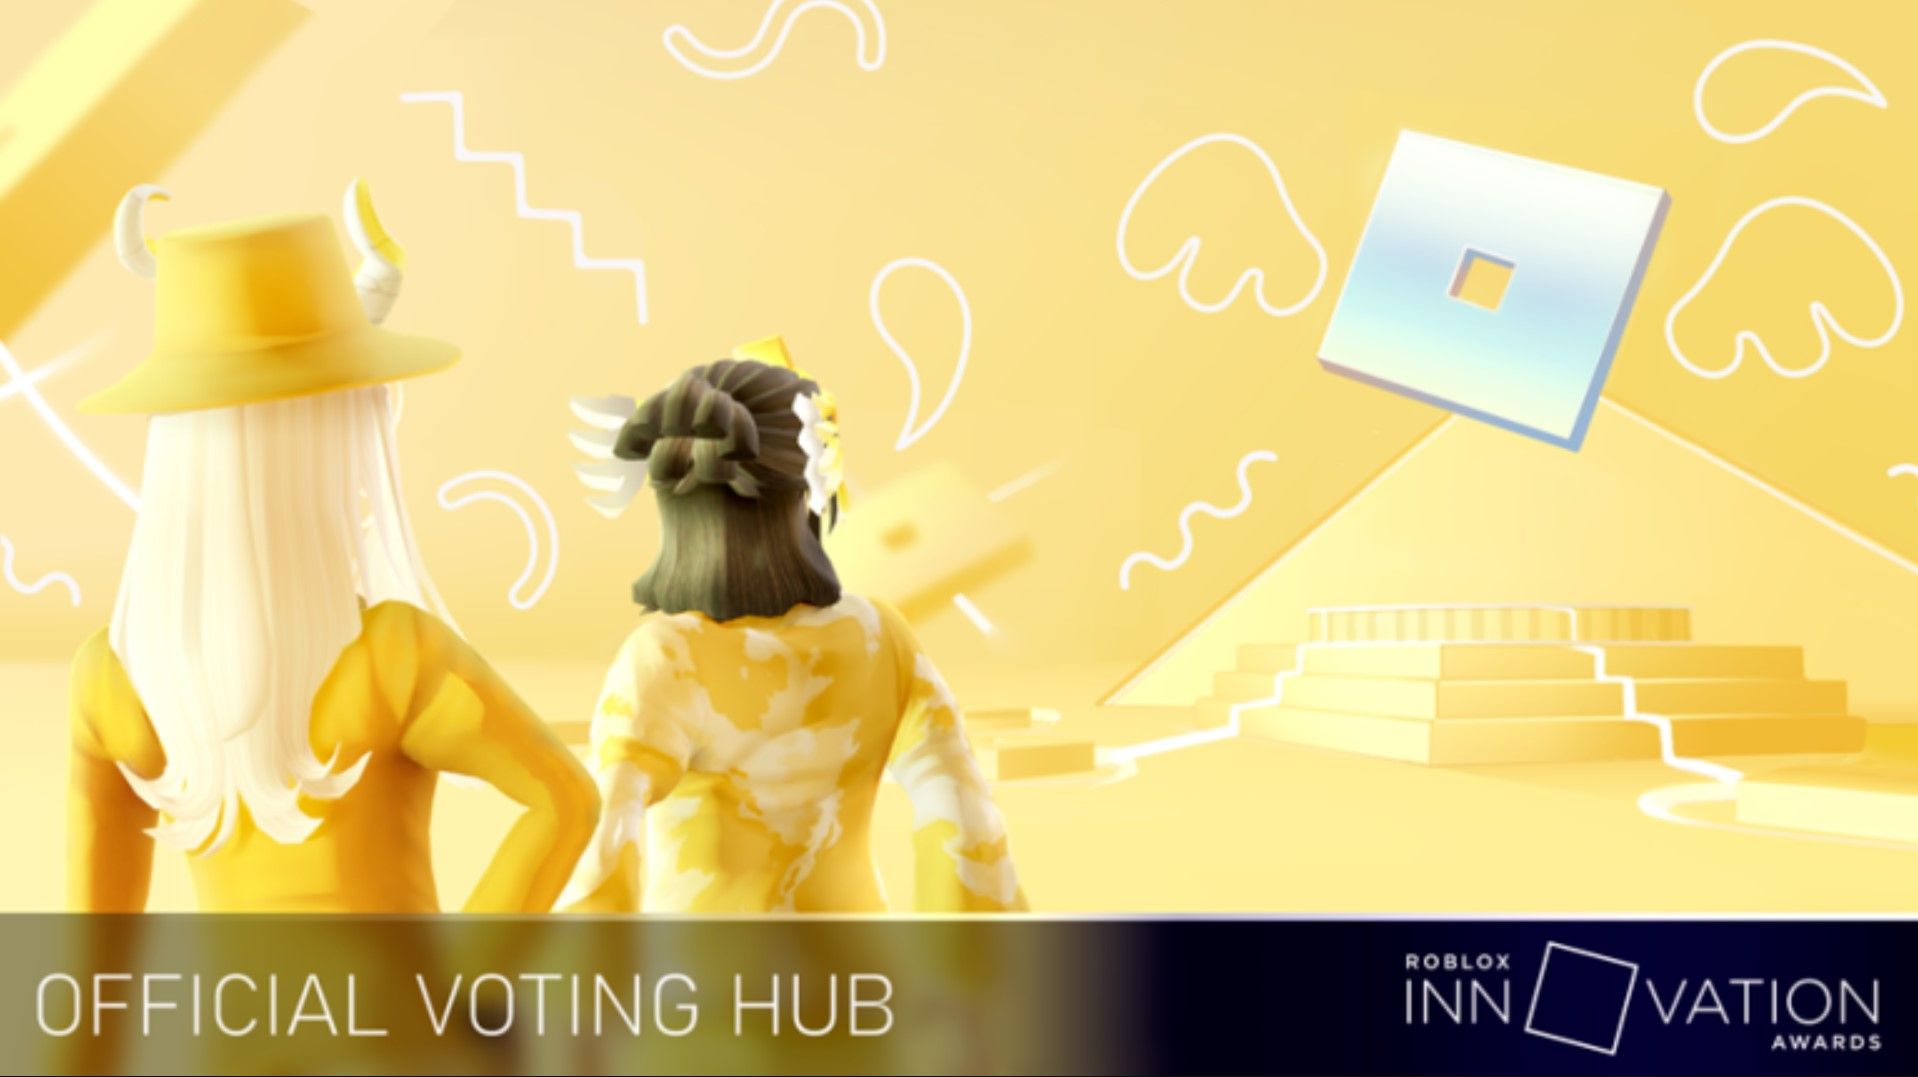 Roblox Innovation Awards How To Use The Voting Hub & Get Rewards